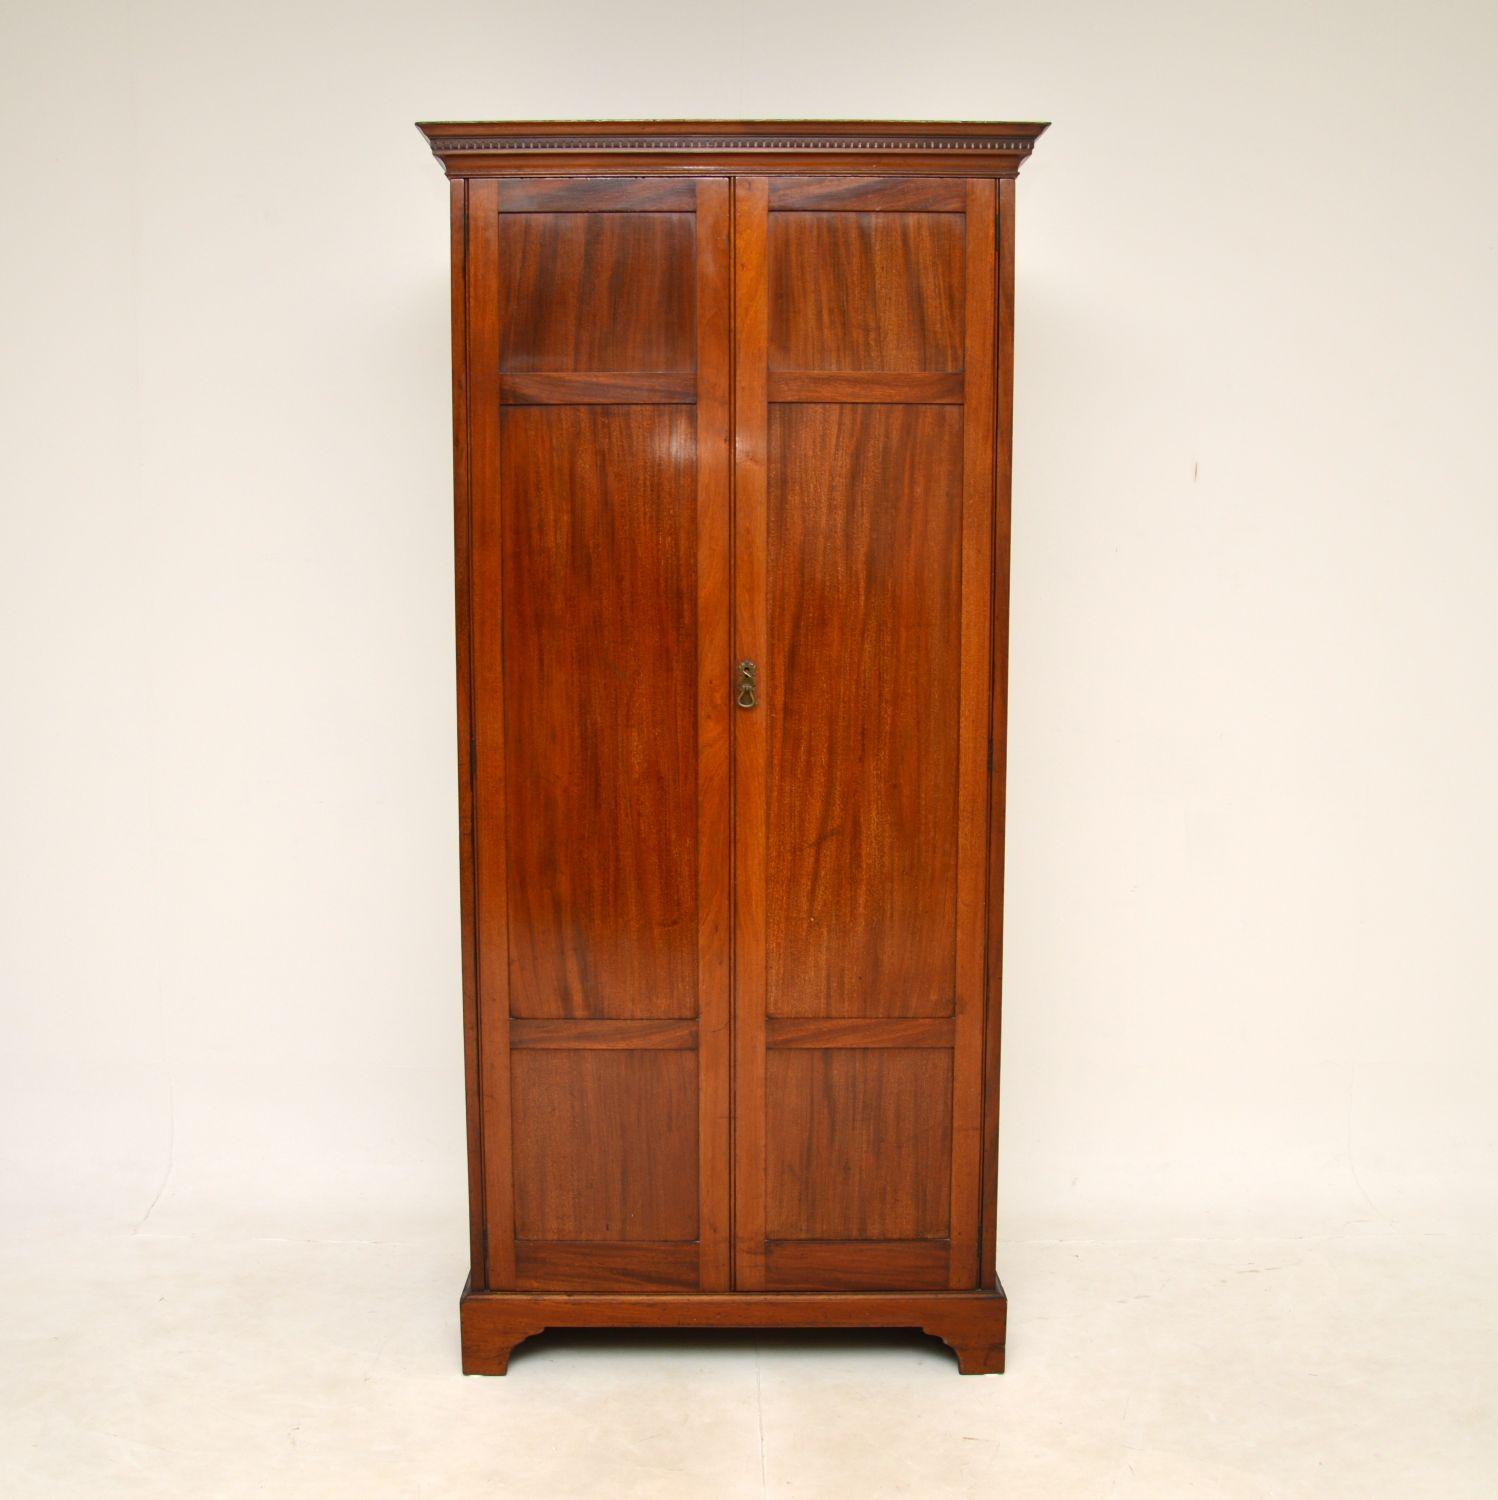 A wonderful antique wardrobe / hall cupboard. This was made in England, it dates from the 1900-1910 period.

The quality is outstanding, this is beautifully made with paneled doors, bracket feet and dental molding under the cornice. It is a very